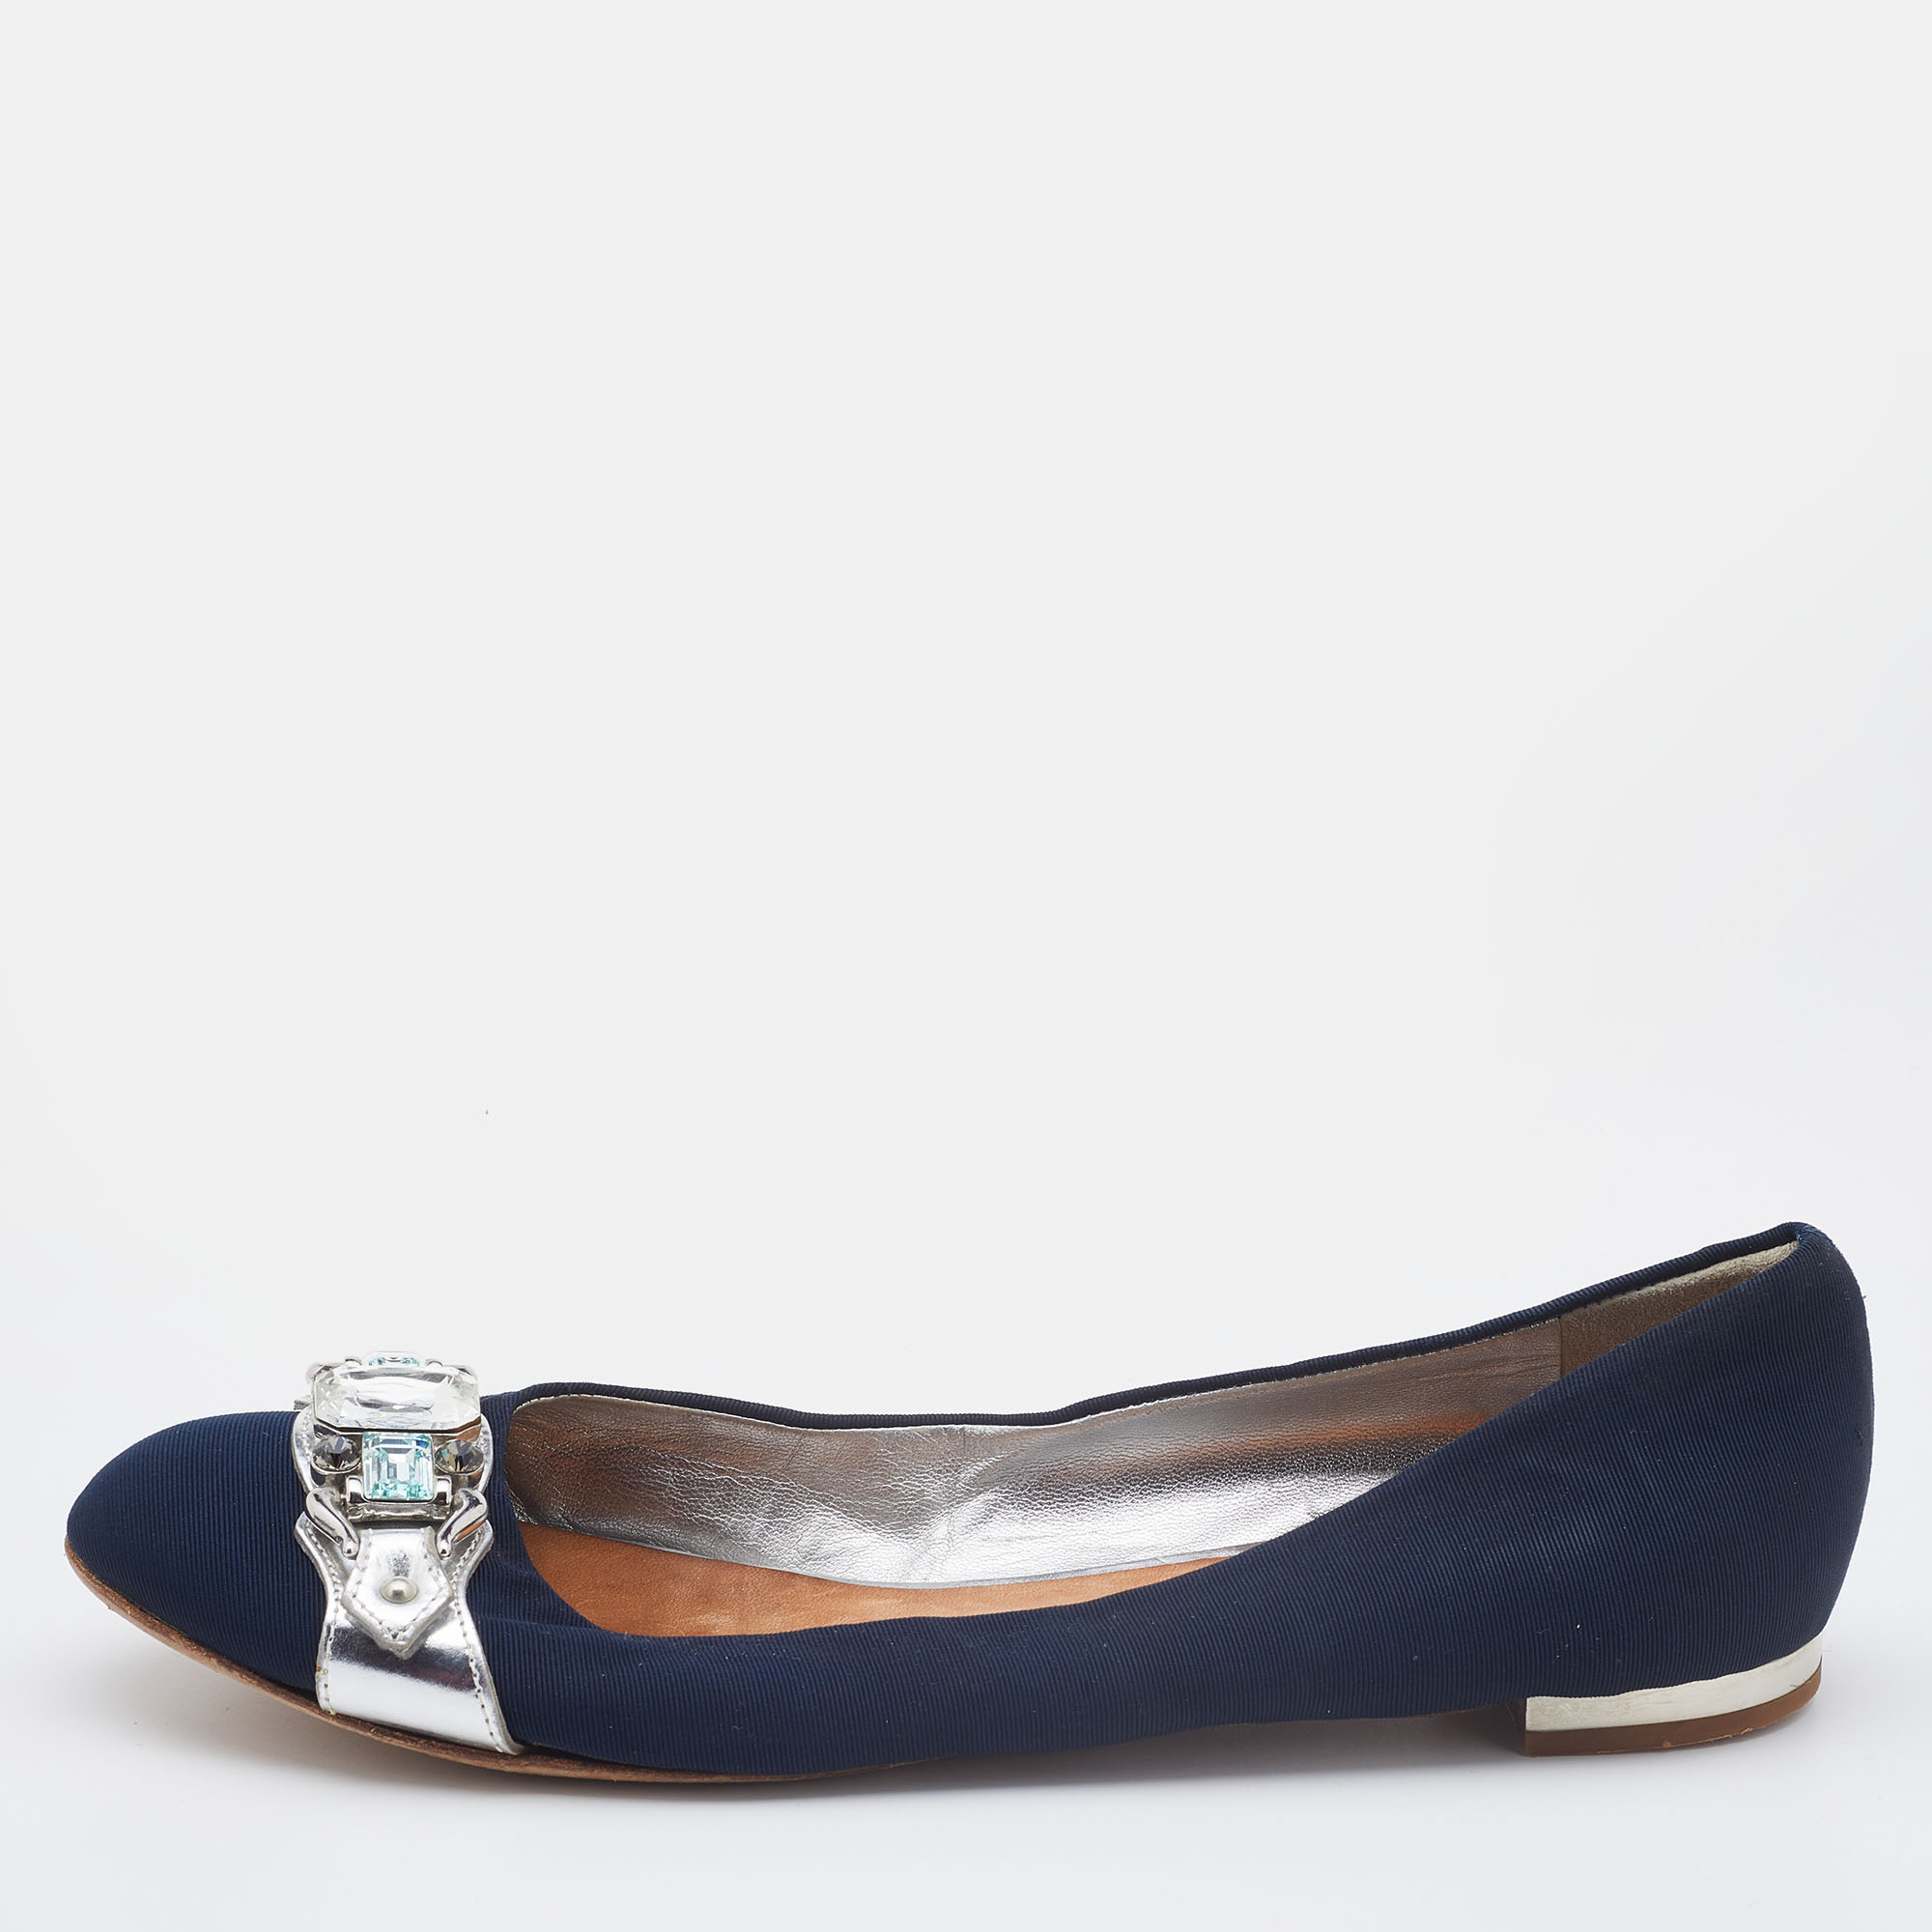 Pre-owned Giuseppe Zanotti Navy Blue Canvas Crystals Embellishment Ballet Flats Size 40.5